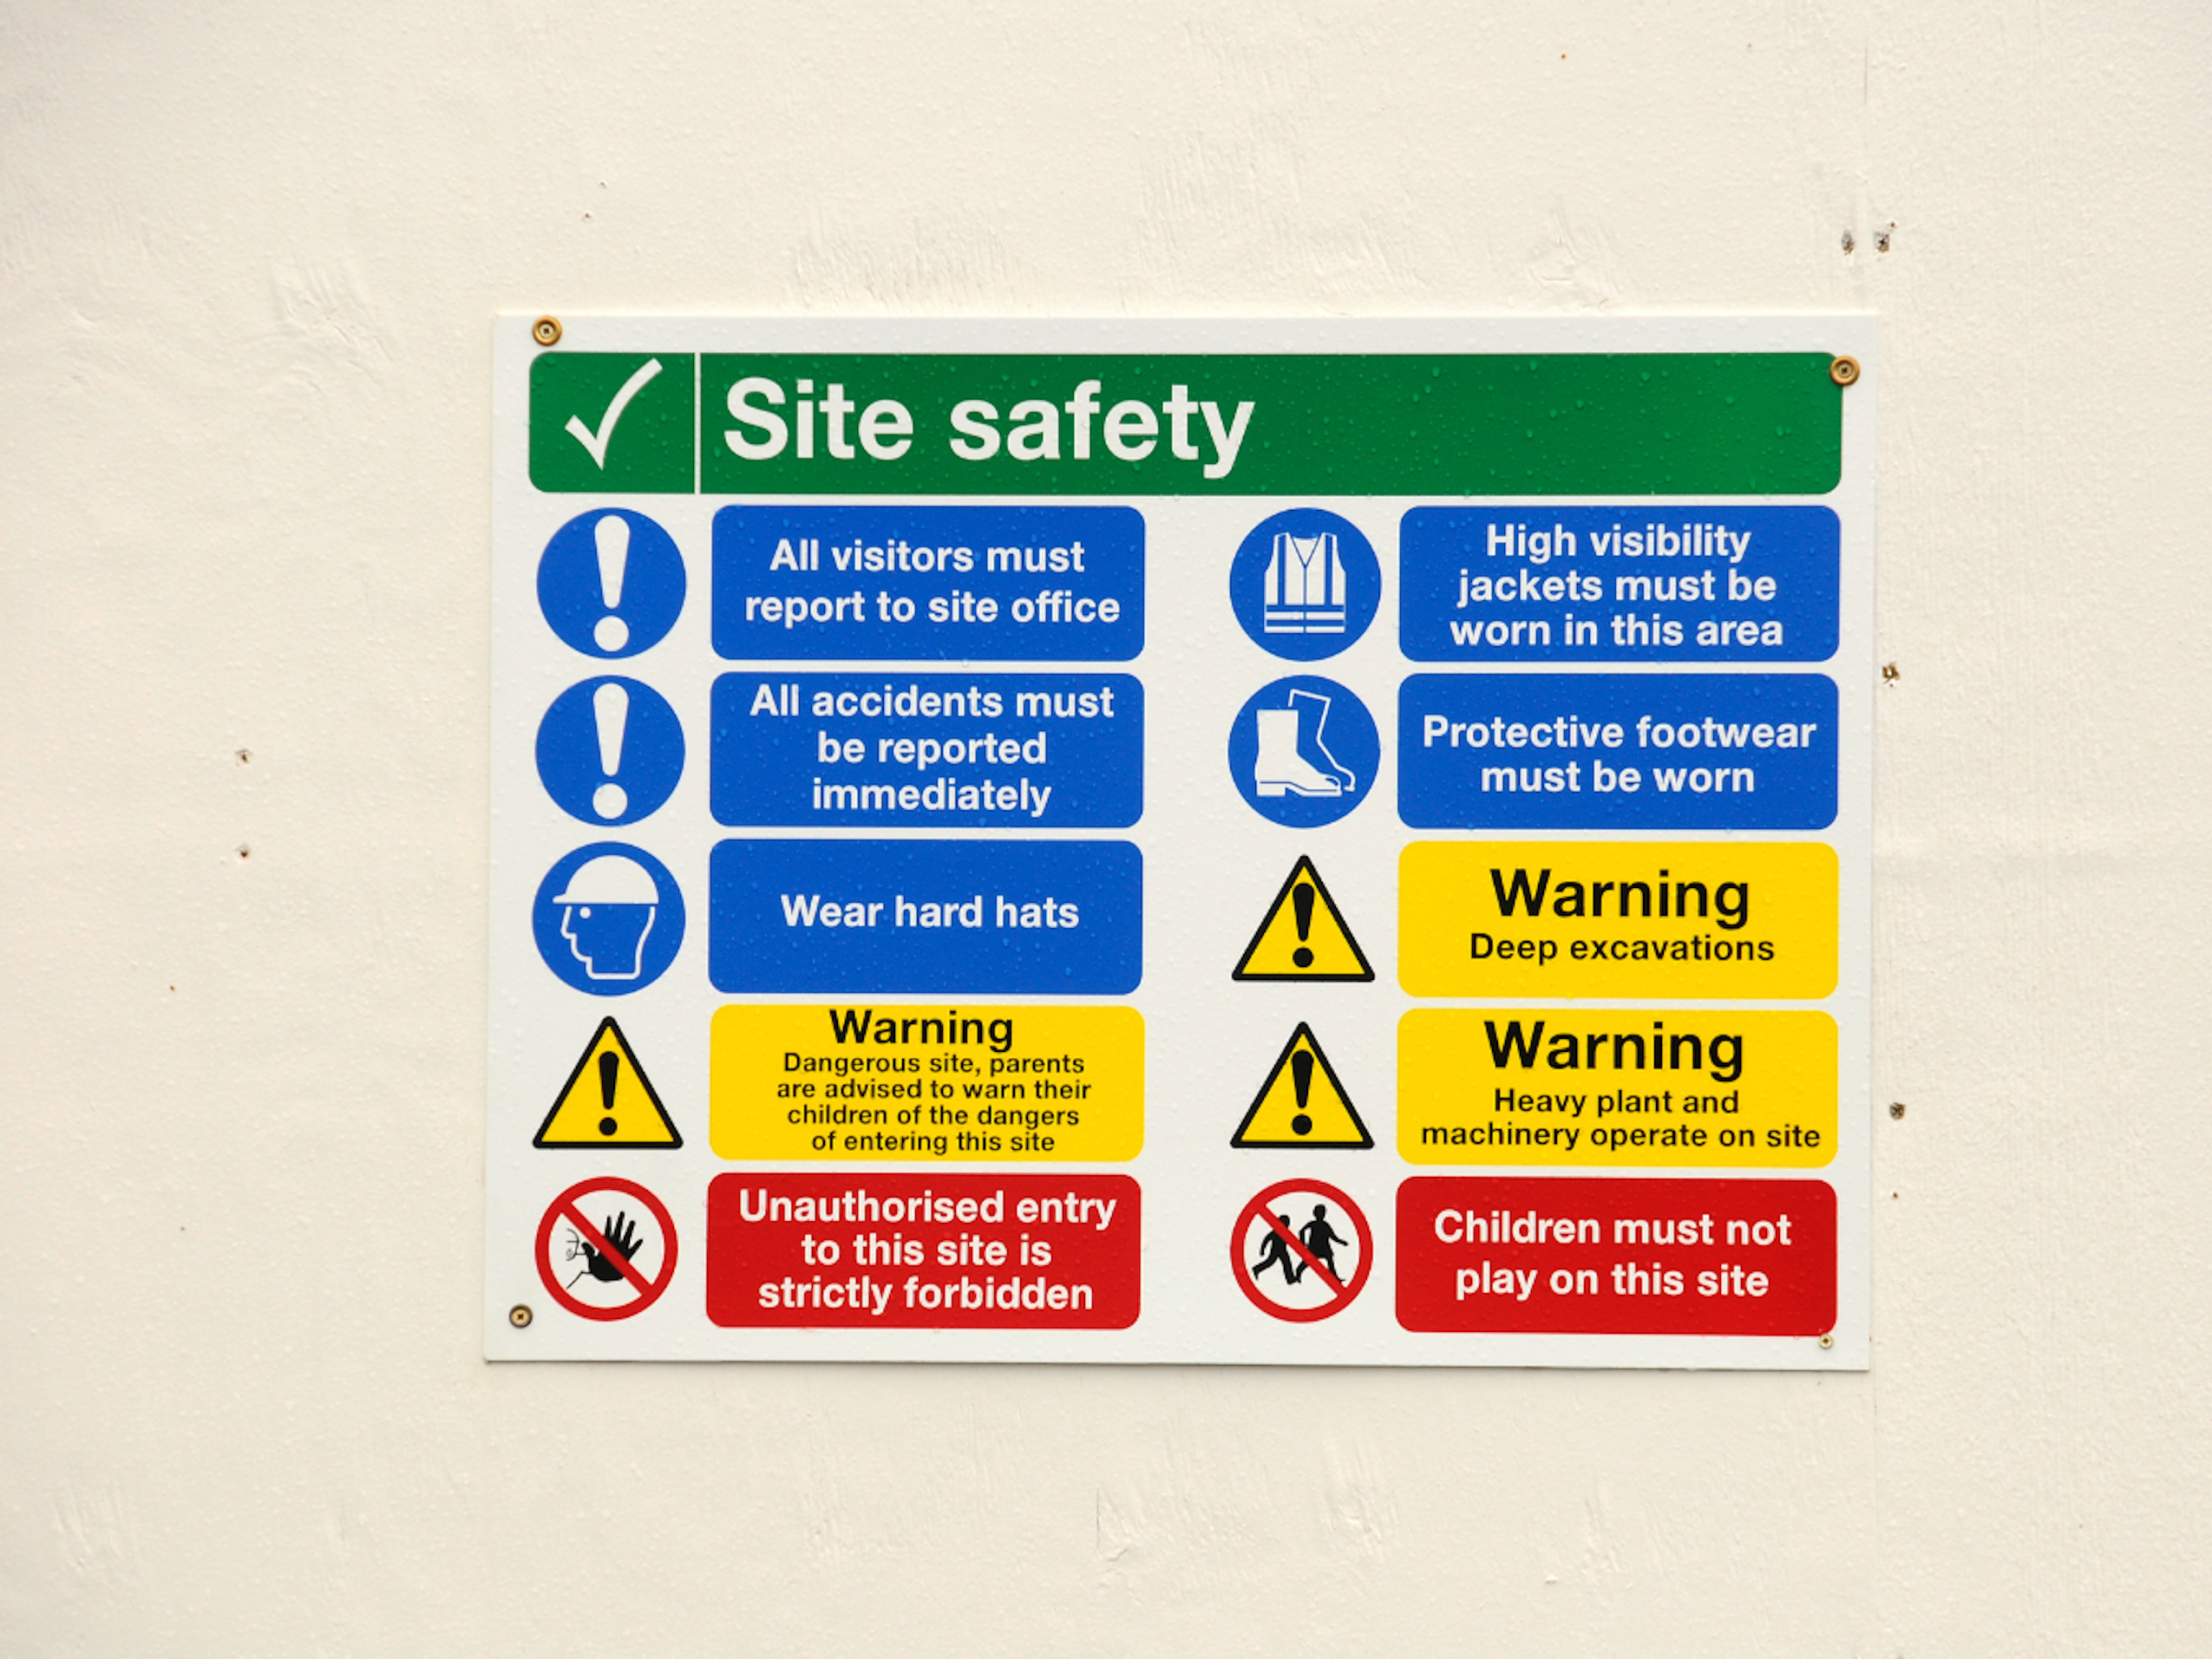 Understanding Colour Codes in Safety Signs